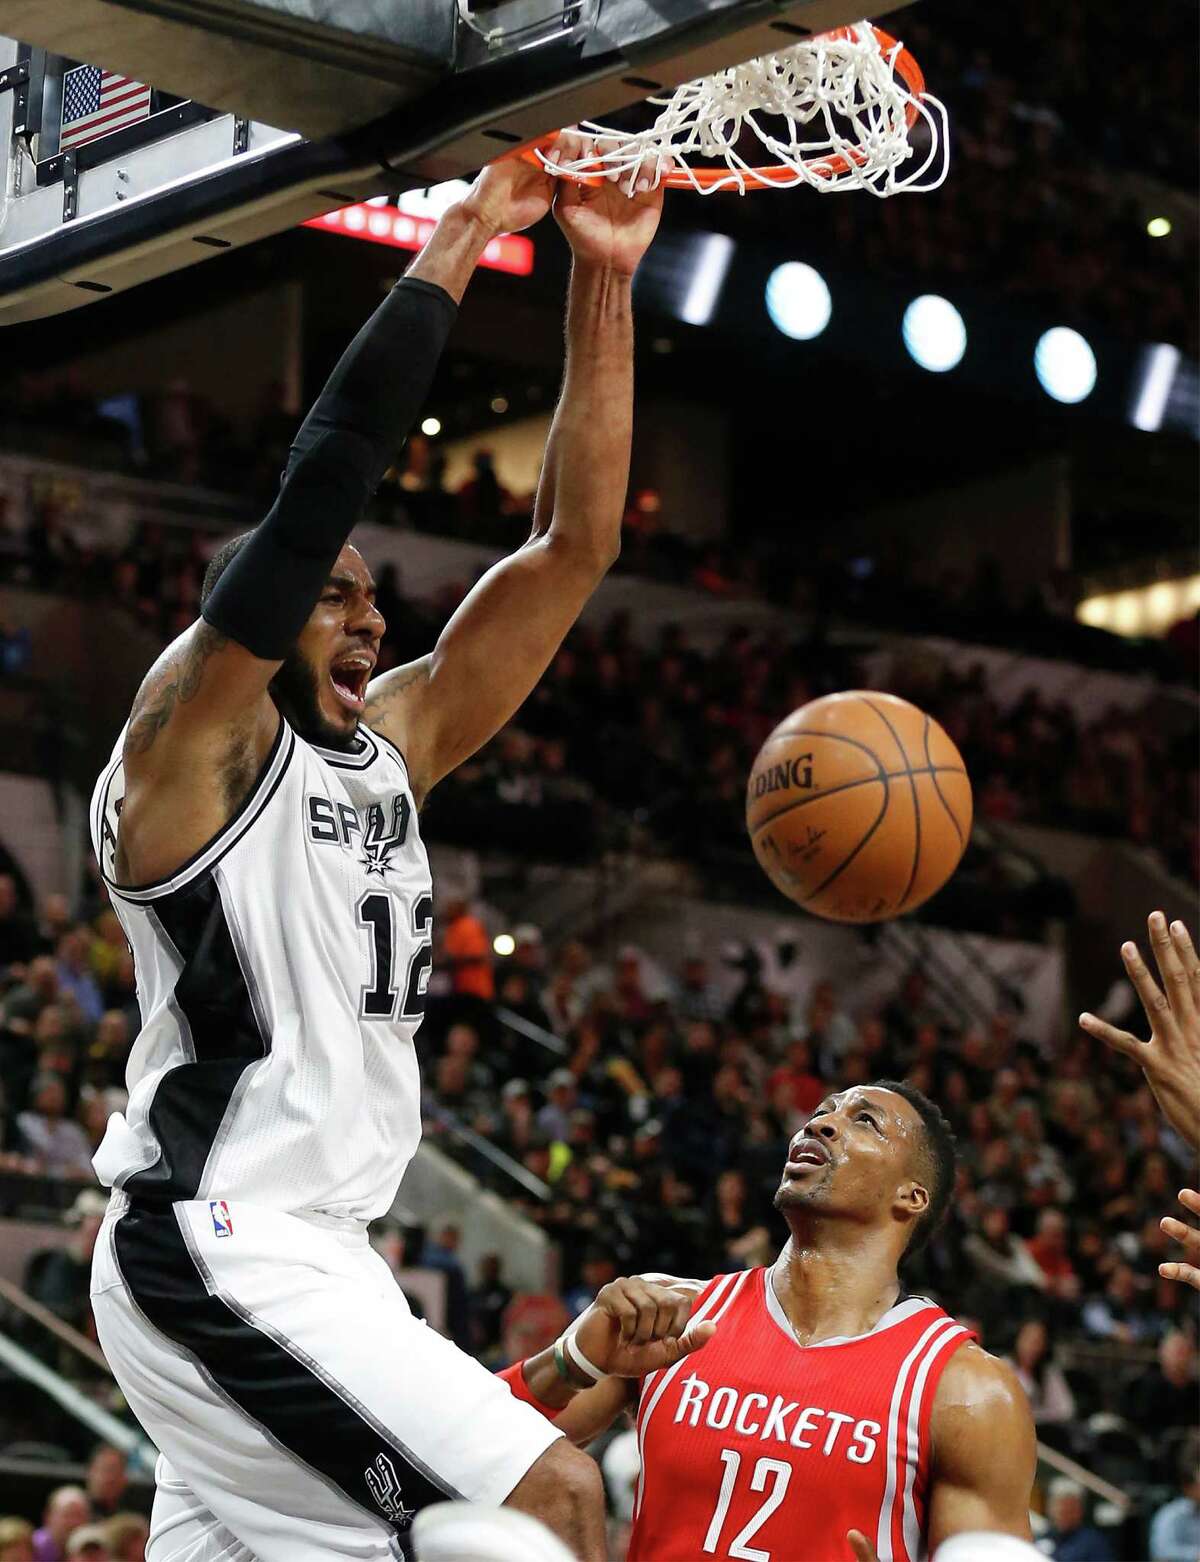 Spurs’ LaMarcus Aldridge dunks on the Houston Rockets’ Dwight Howard at the AT&T Center on Jan. 27, 2016.